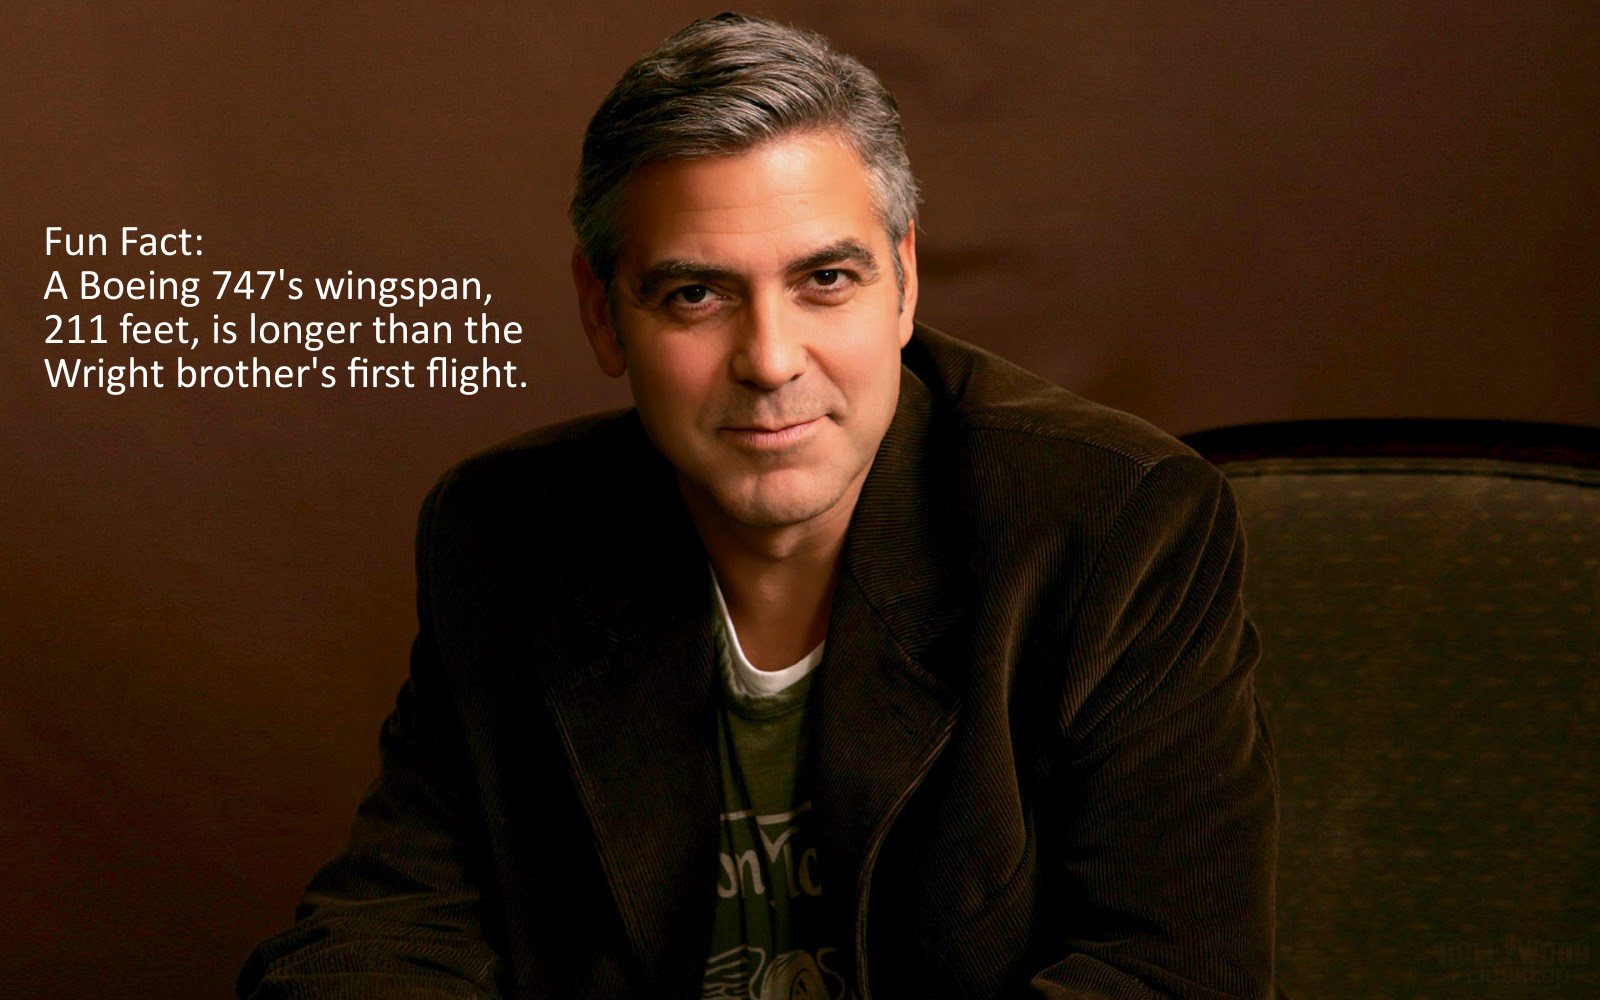 george clooney - Fun Fact A Boeing 747's wingspan, 211 feet, is longer than the Wright brother's first flight.